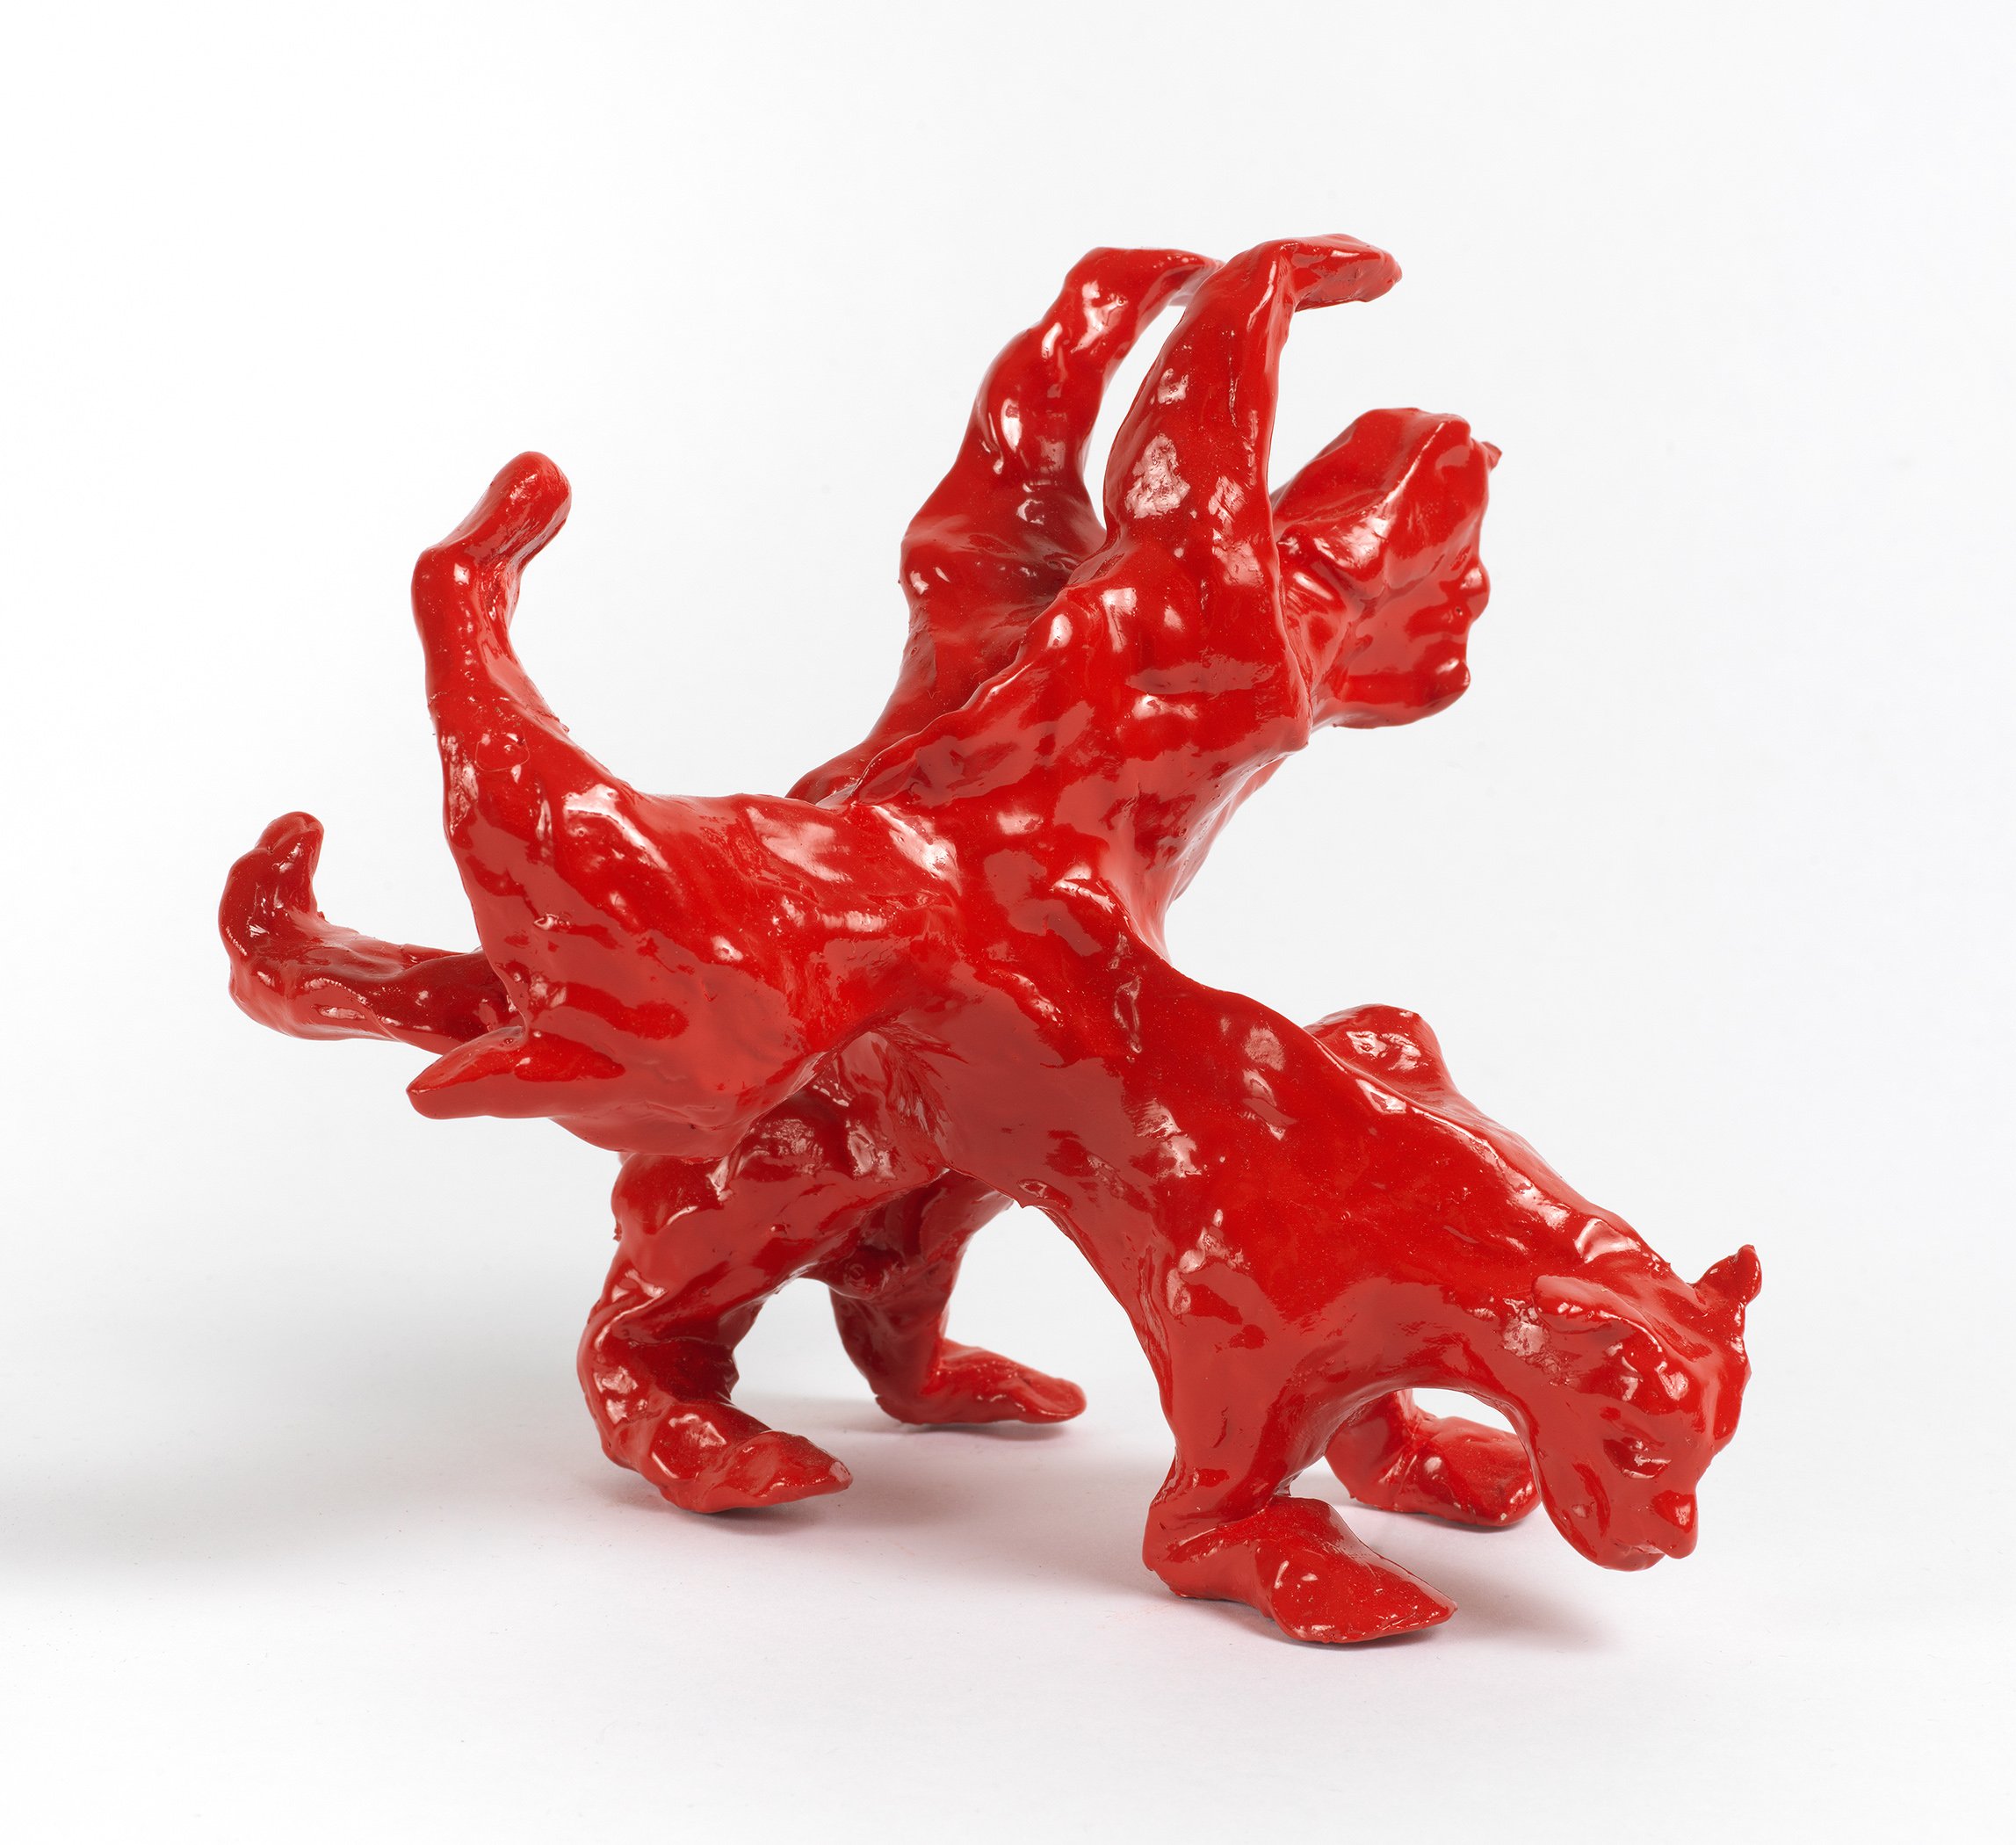   Red Animals , 2020, enamel on air-drying clay, 7” x 7” x 7” 